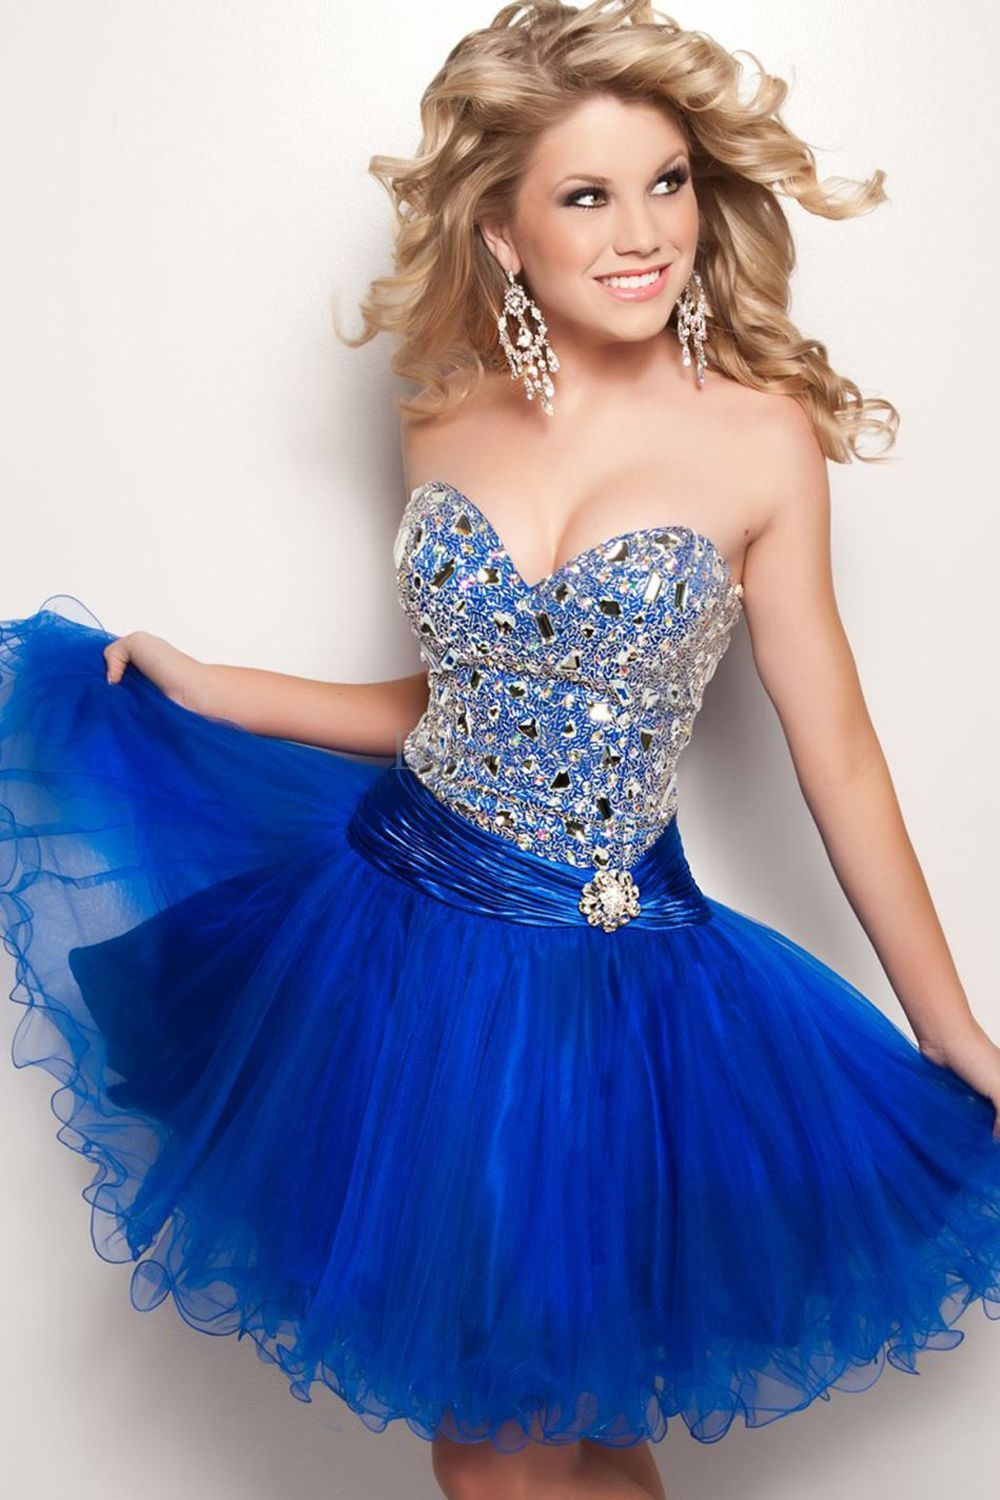 Royal Blue Sweet 16 Dress with Peaked Sweetheart Neckline and Crystalsdressale.c